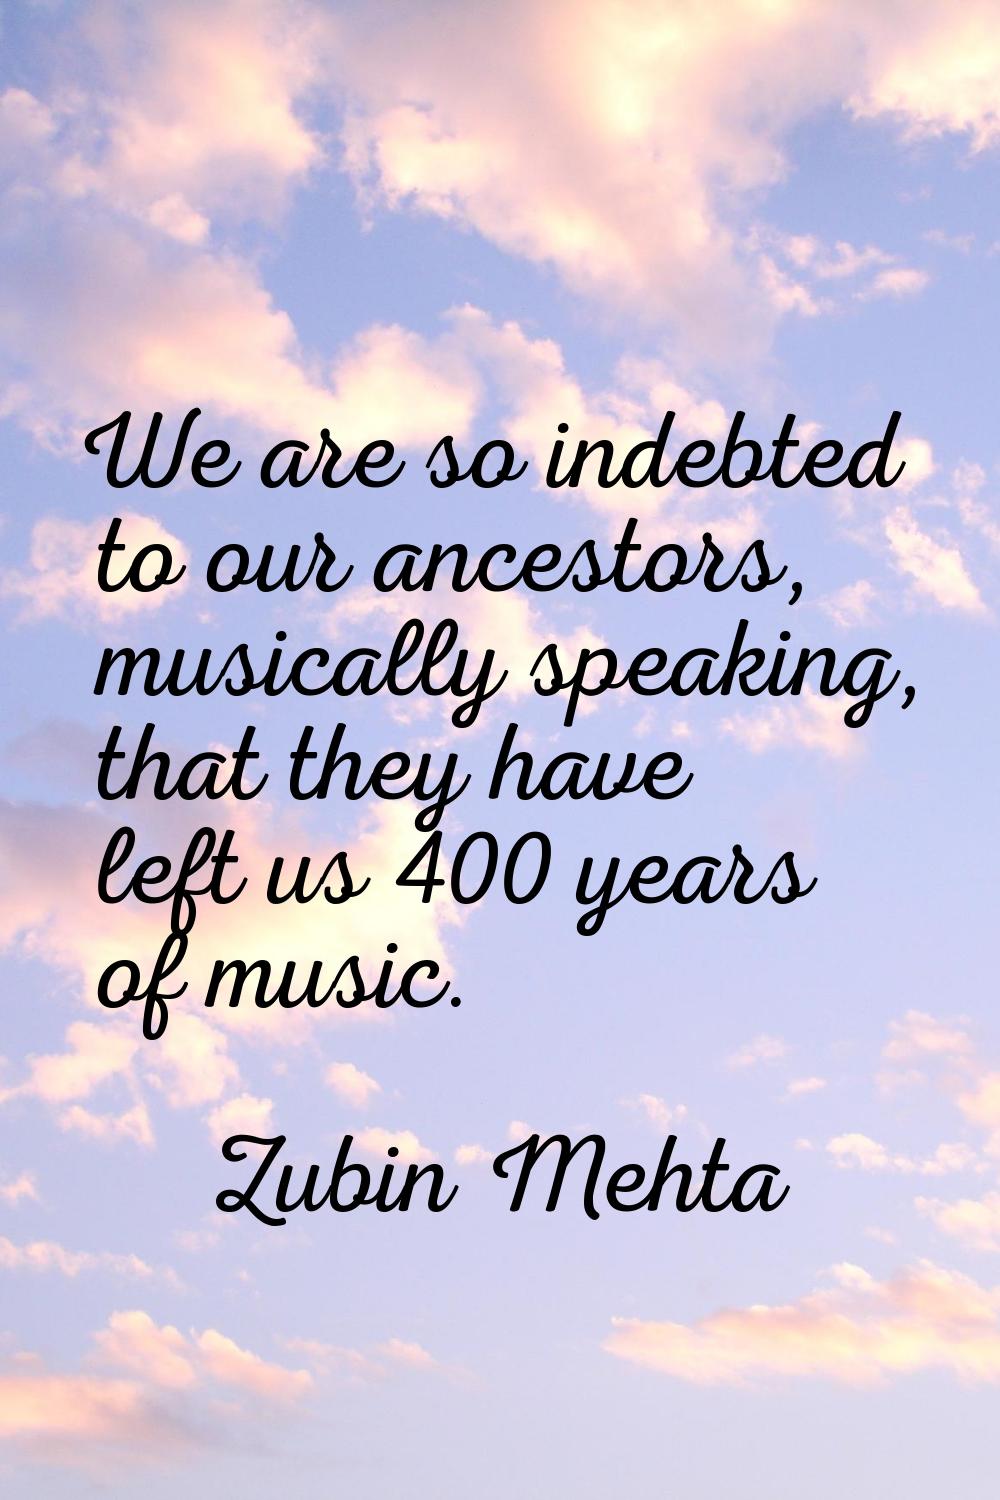 We are so indebted to our ancestors, musically speaking, that they have left us 400 years of music.